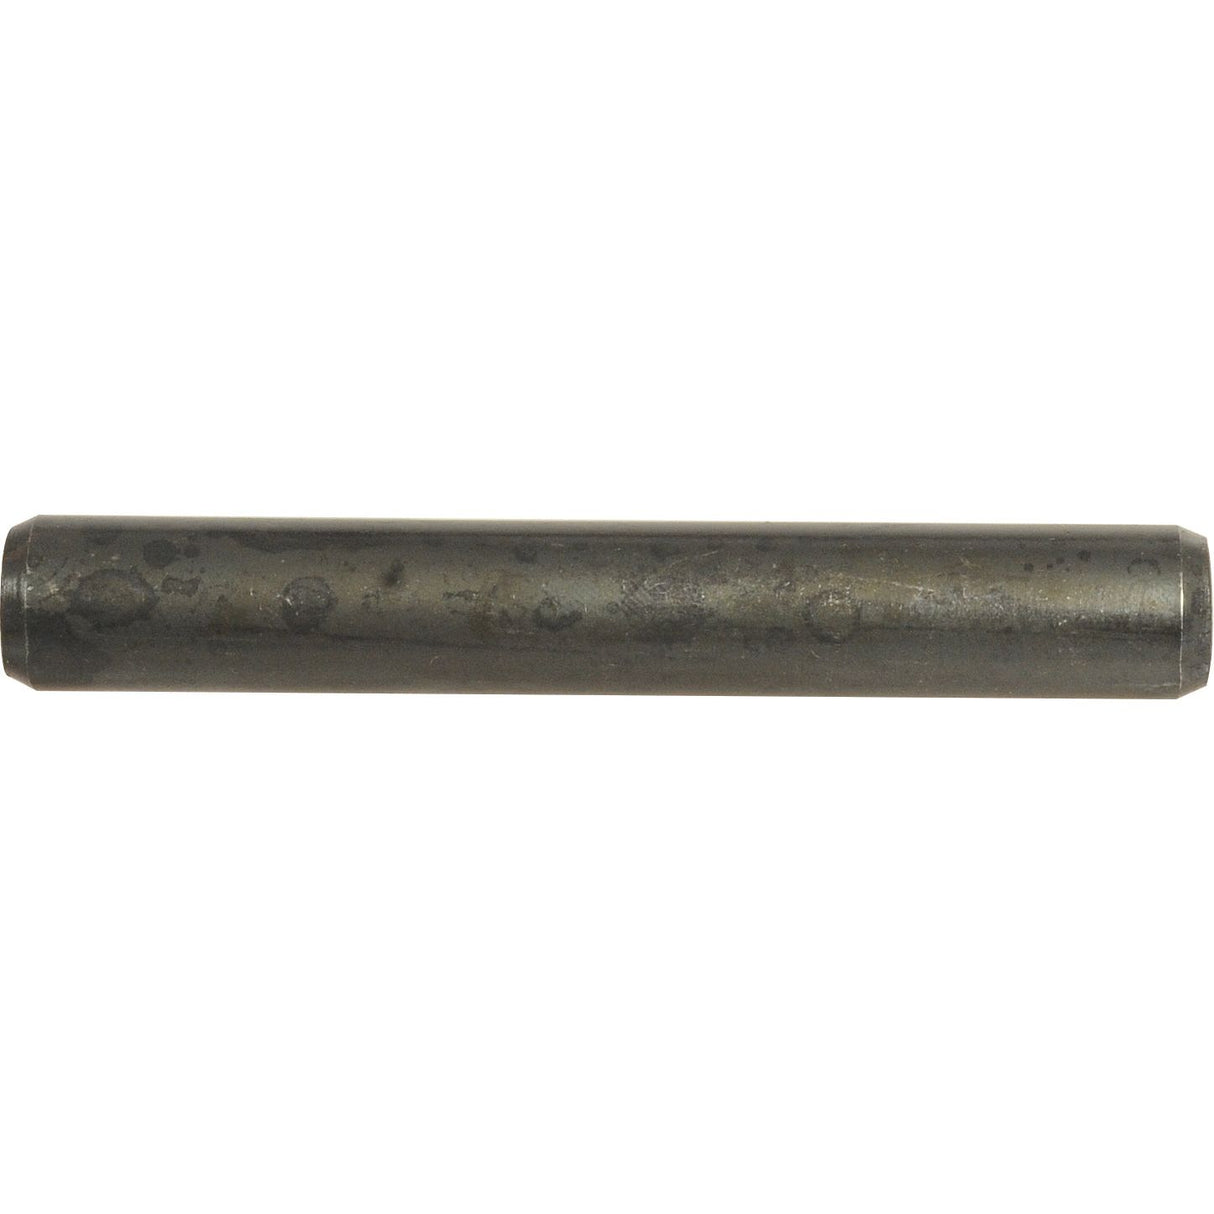 Imperial Roll Pin, Pin ⌀5/16'' x 2'' - S.1140 - Farming Parts